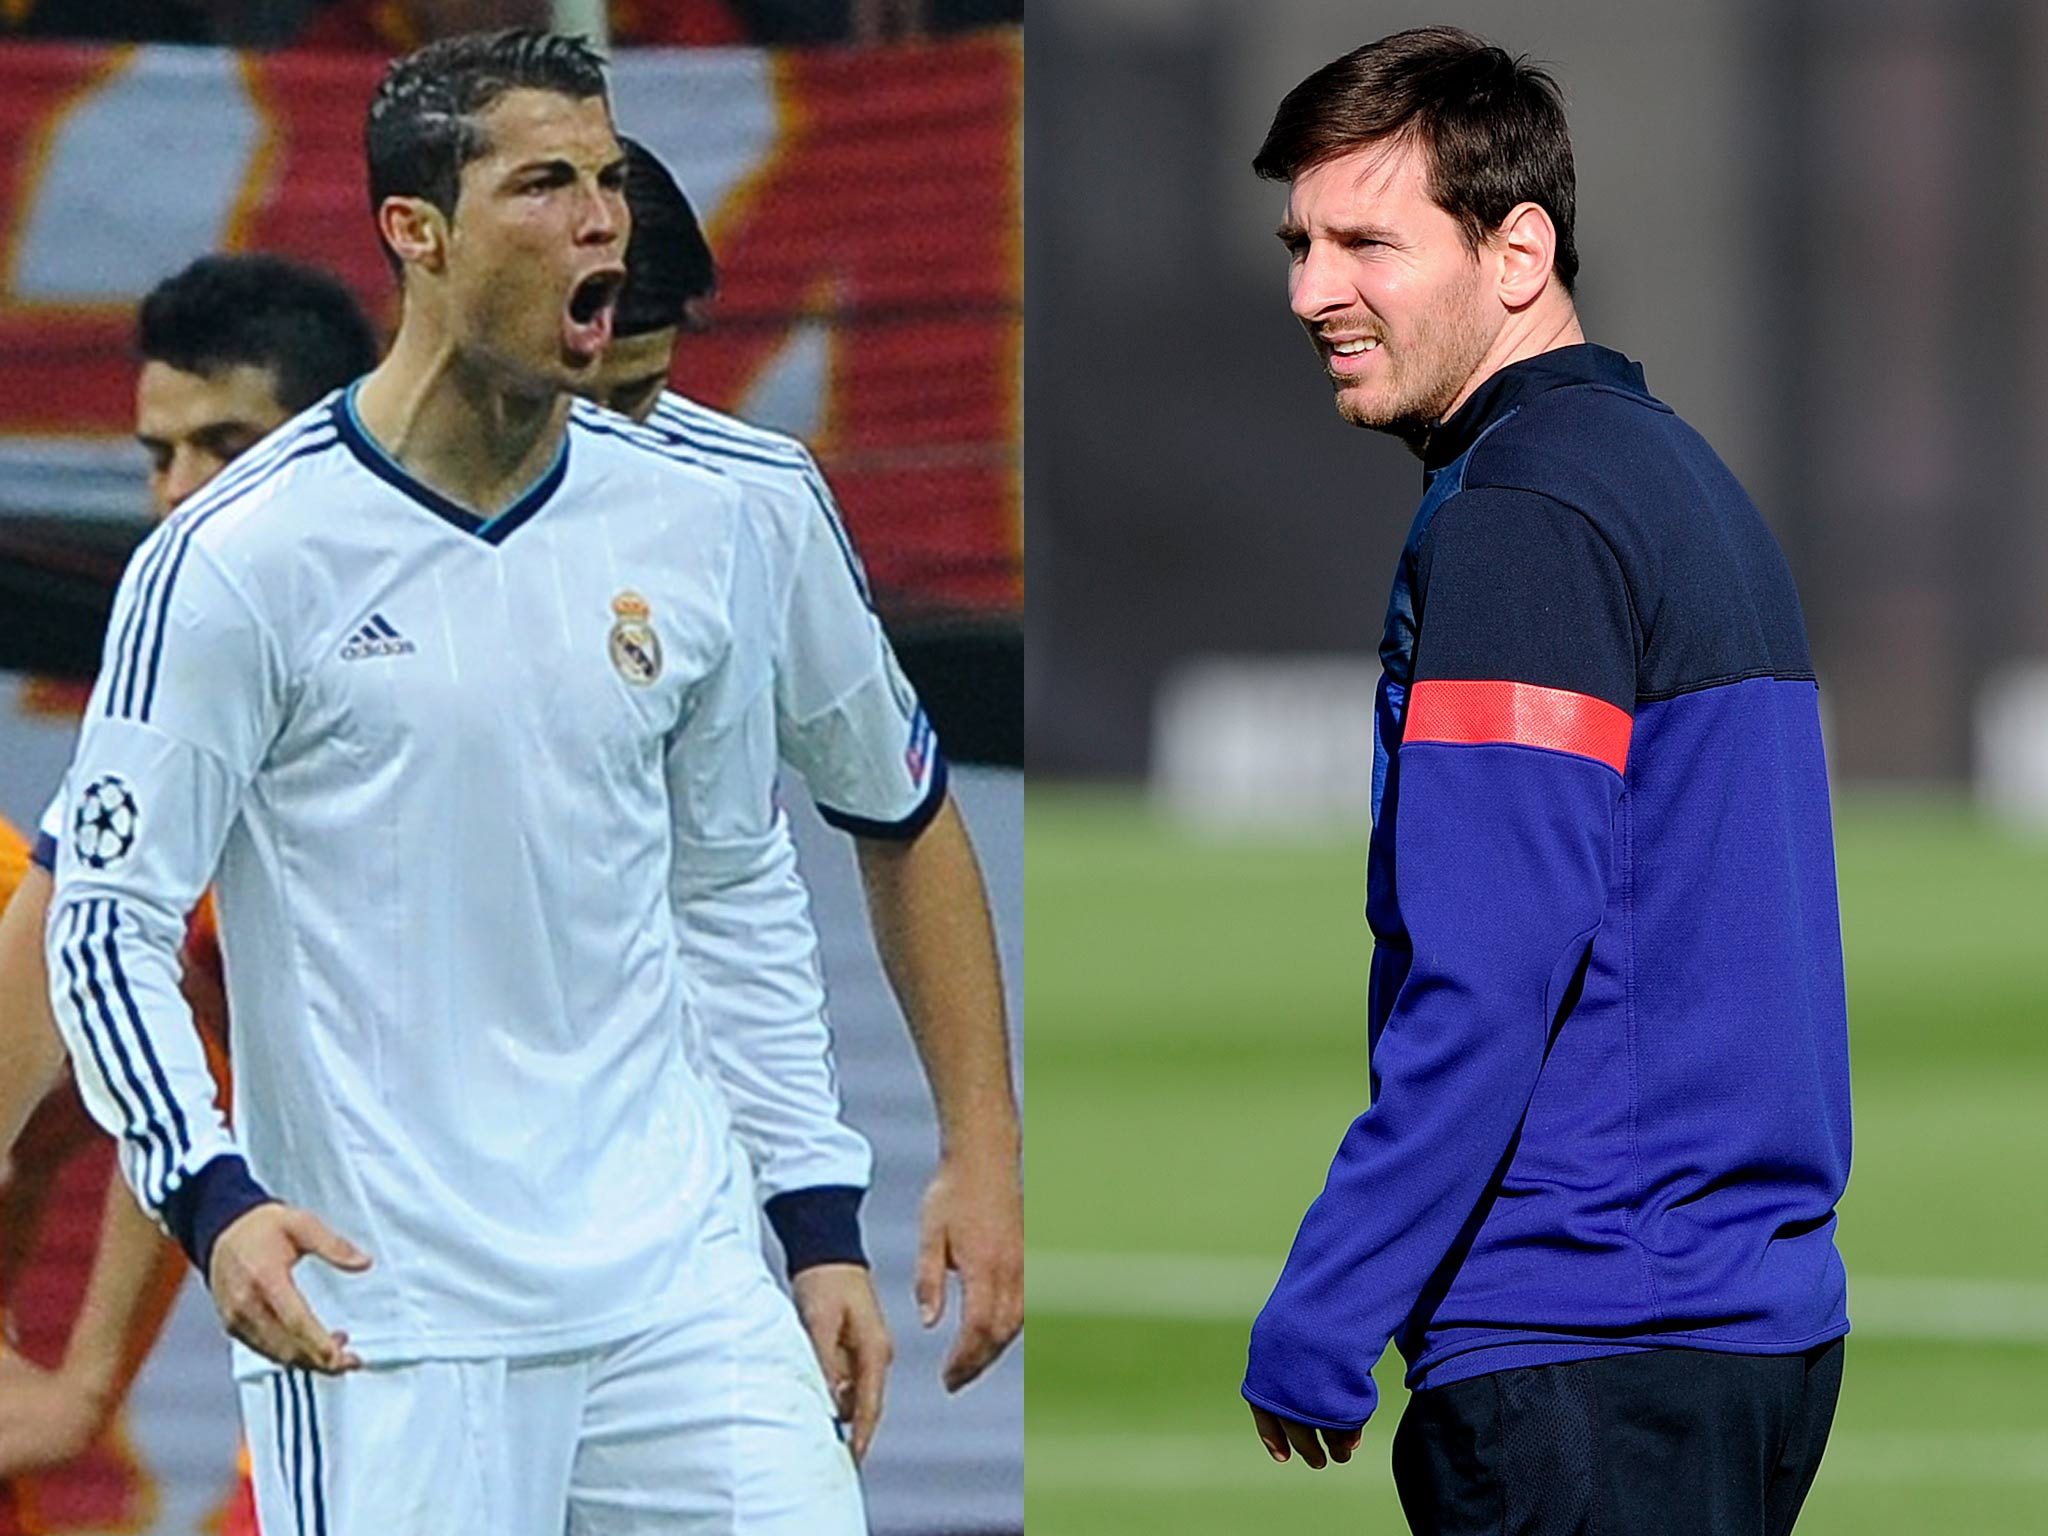 Lionel Messi v Cristiano Ronaldo - world's greatest players locked in new  battle, The Independent